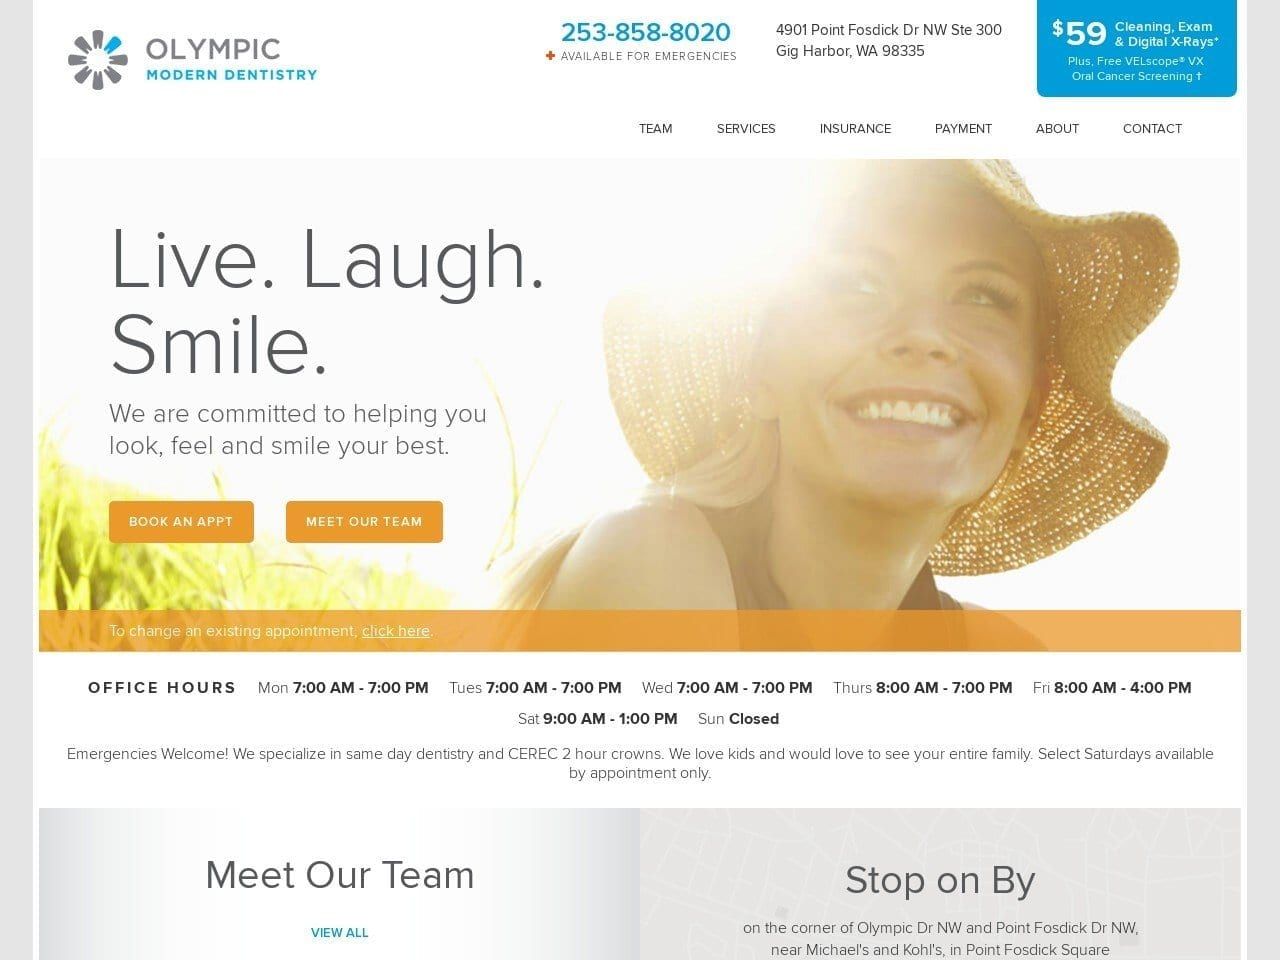 Olympic Modern Dentistry and Orthodontics Website Screenshot from olympicmoderndentistry.com